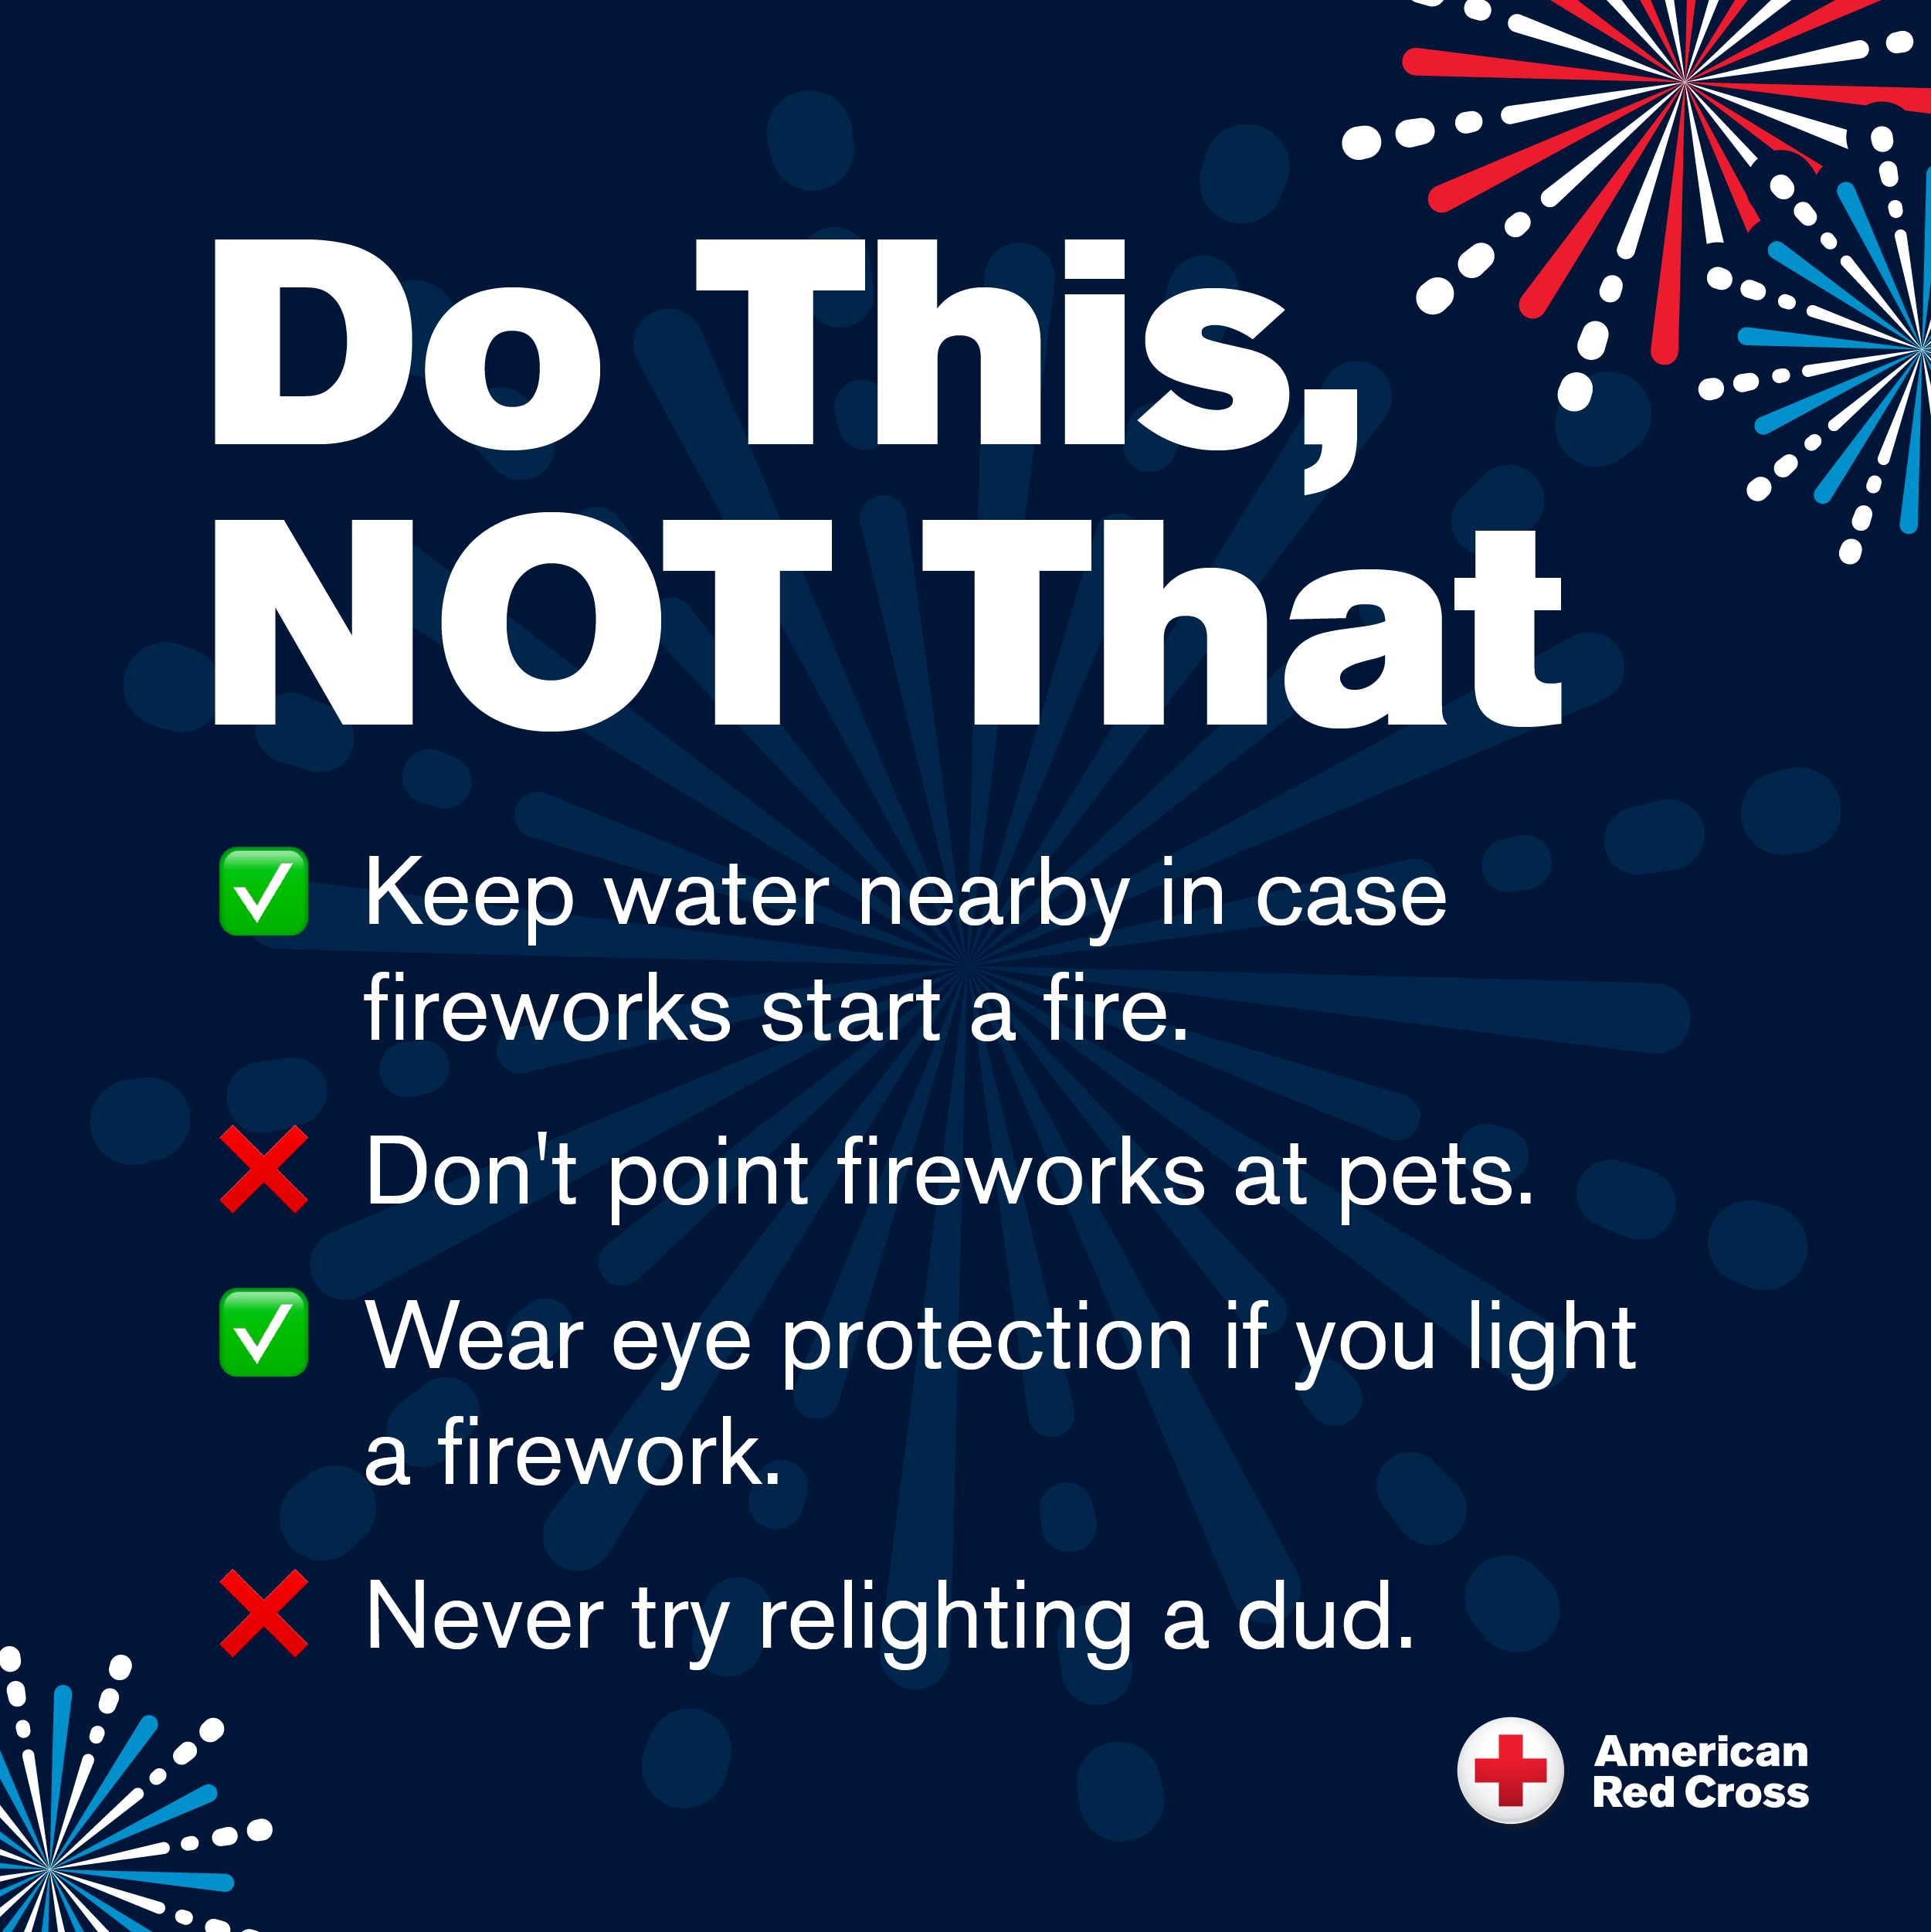 How to Have a Safe 4th of July